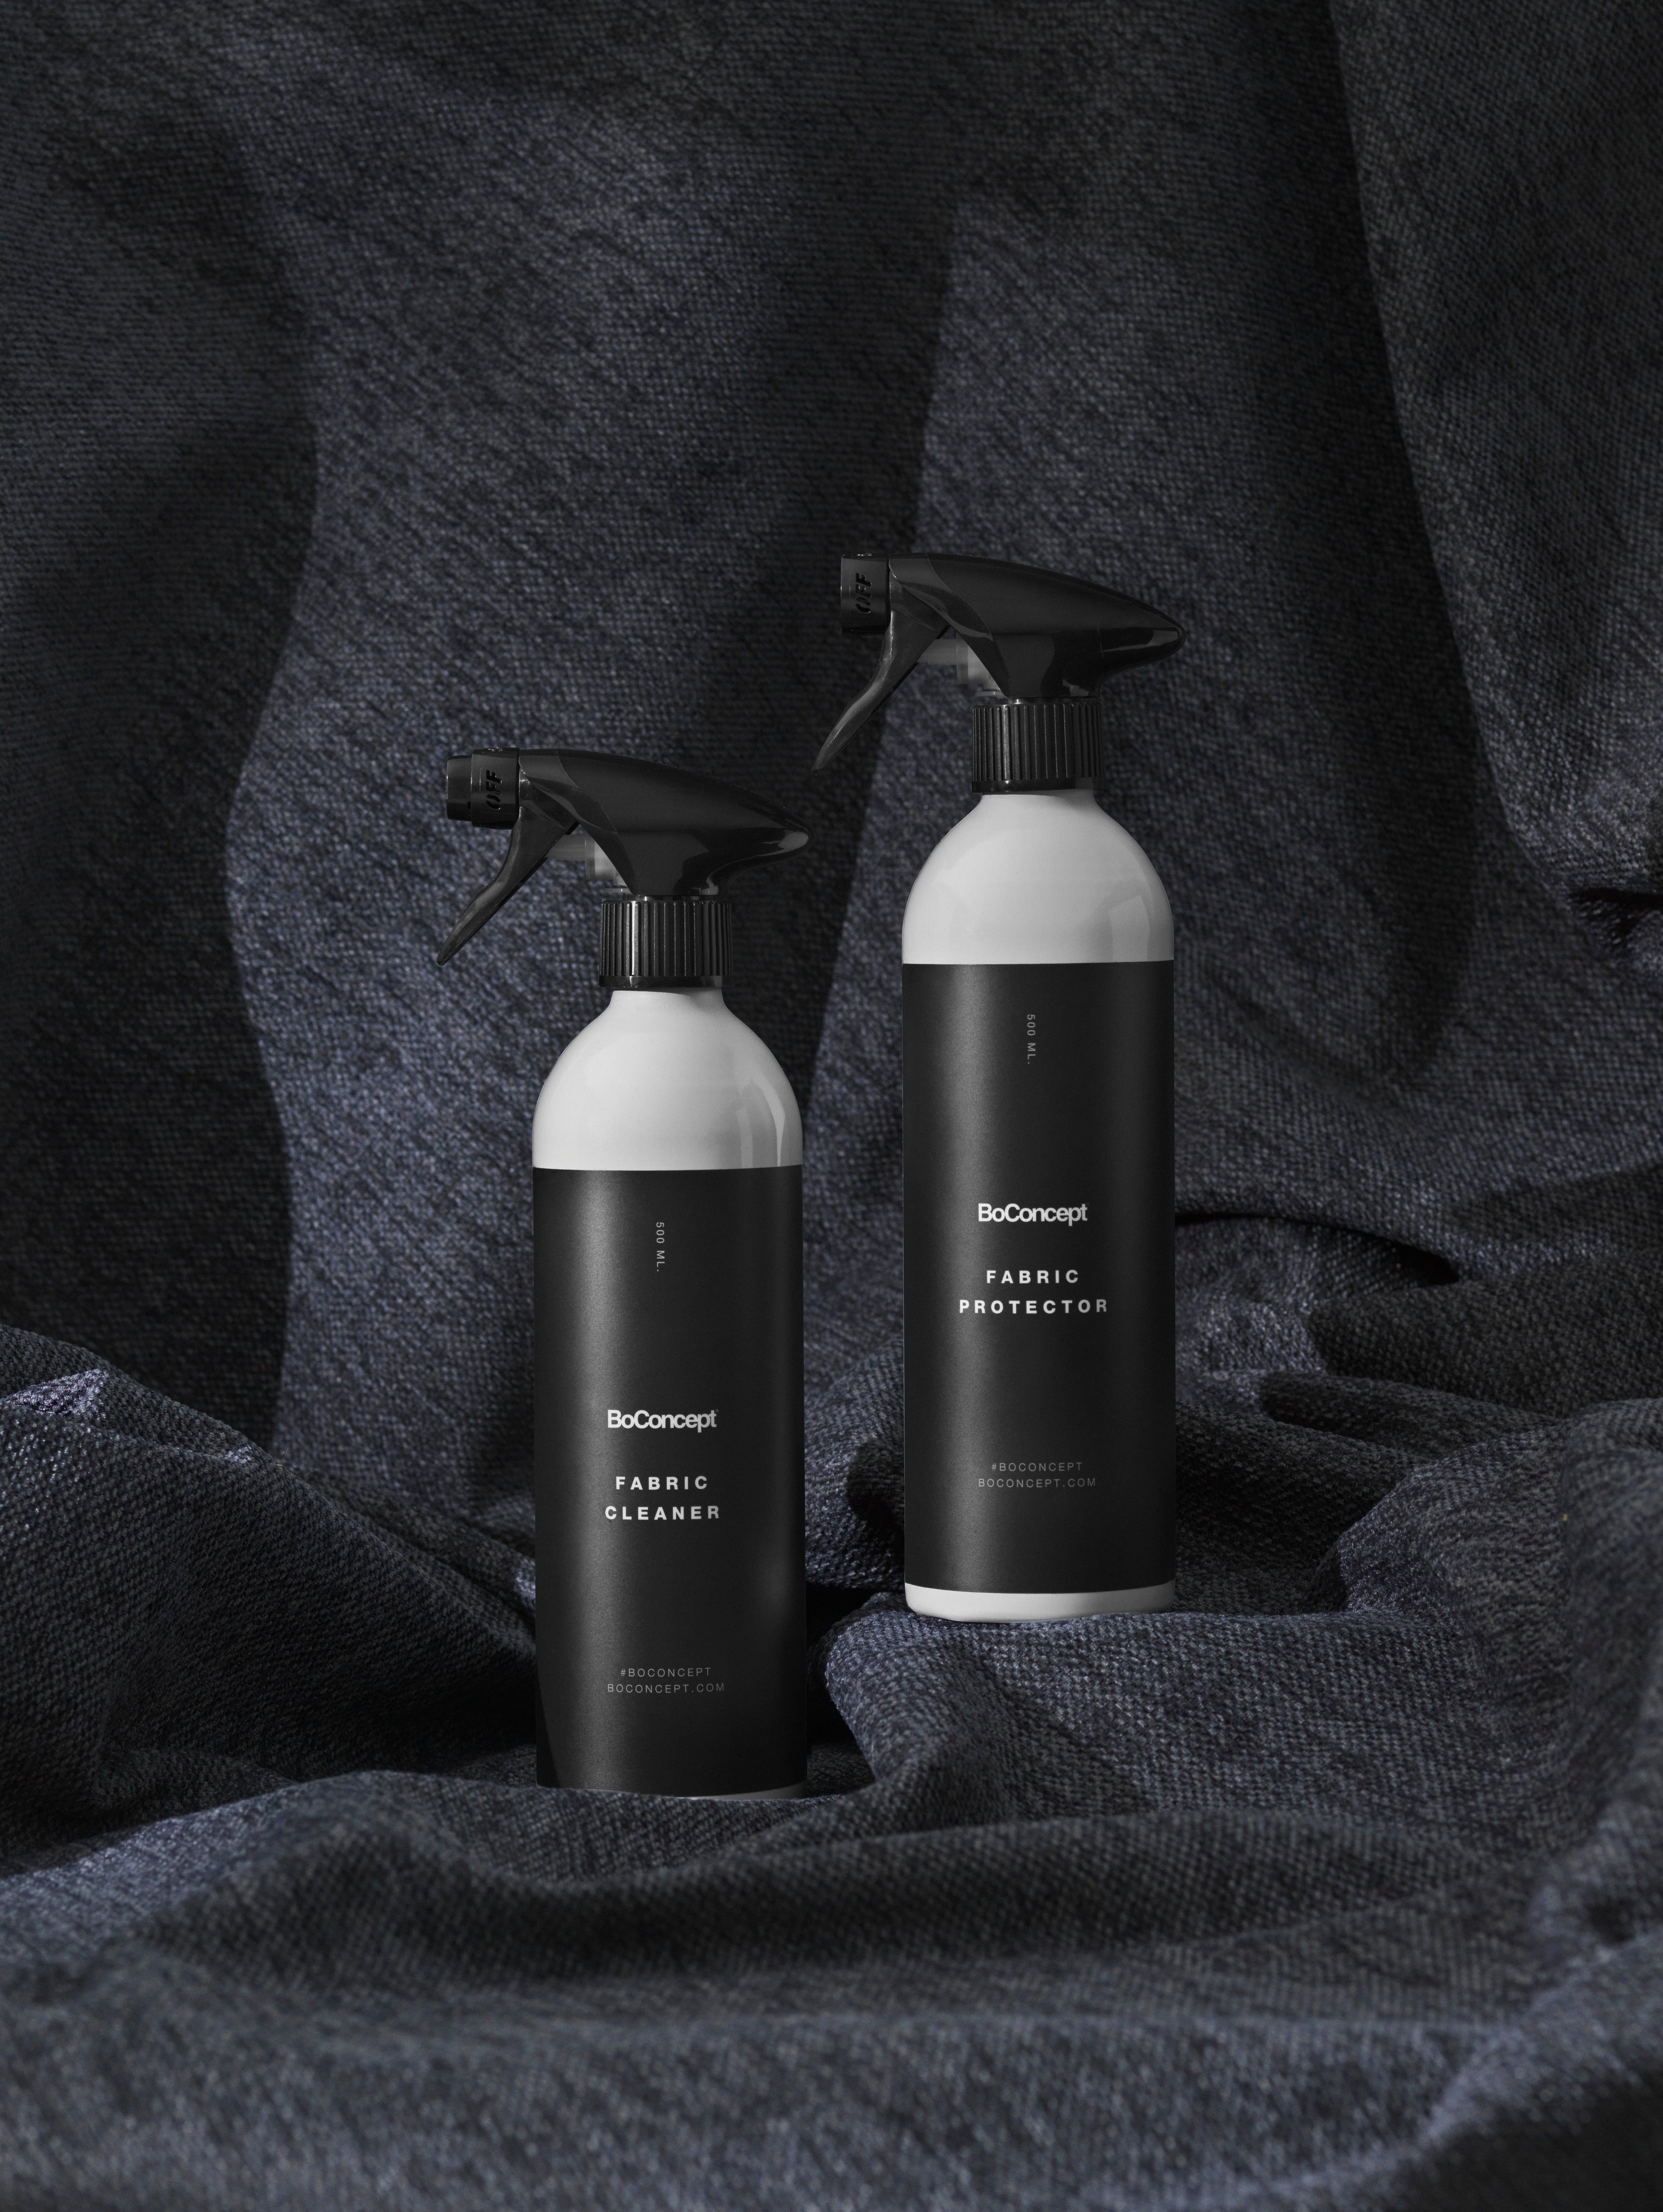 BoConcept fabric cleaner and protector bottles on a textured blue fabric